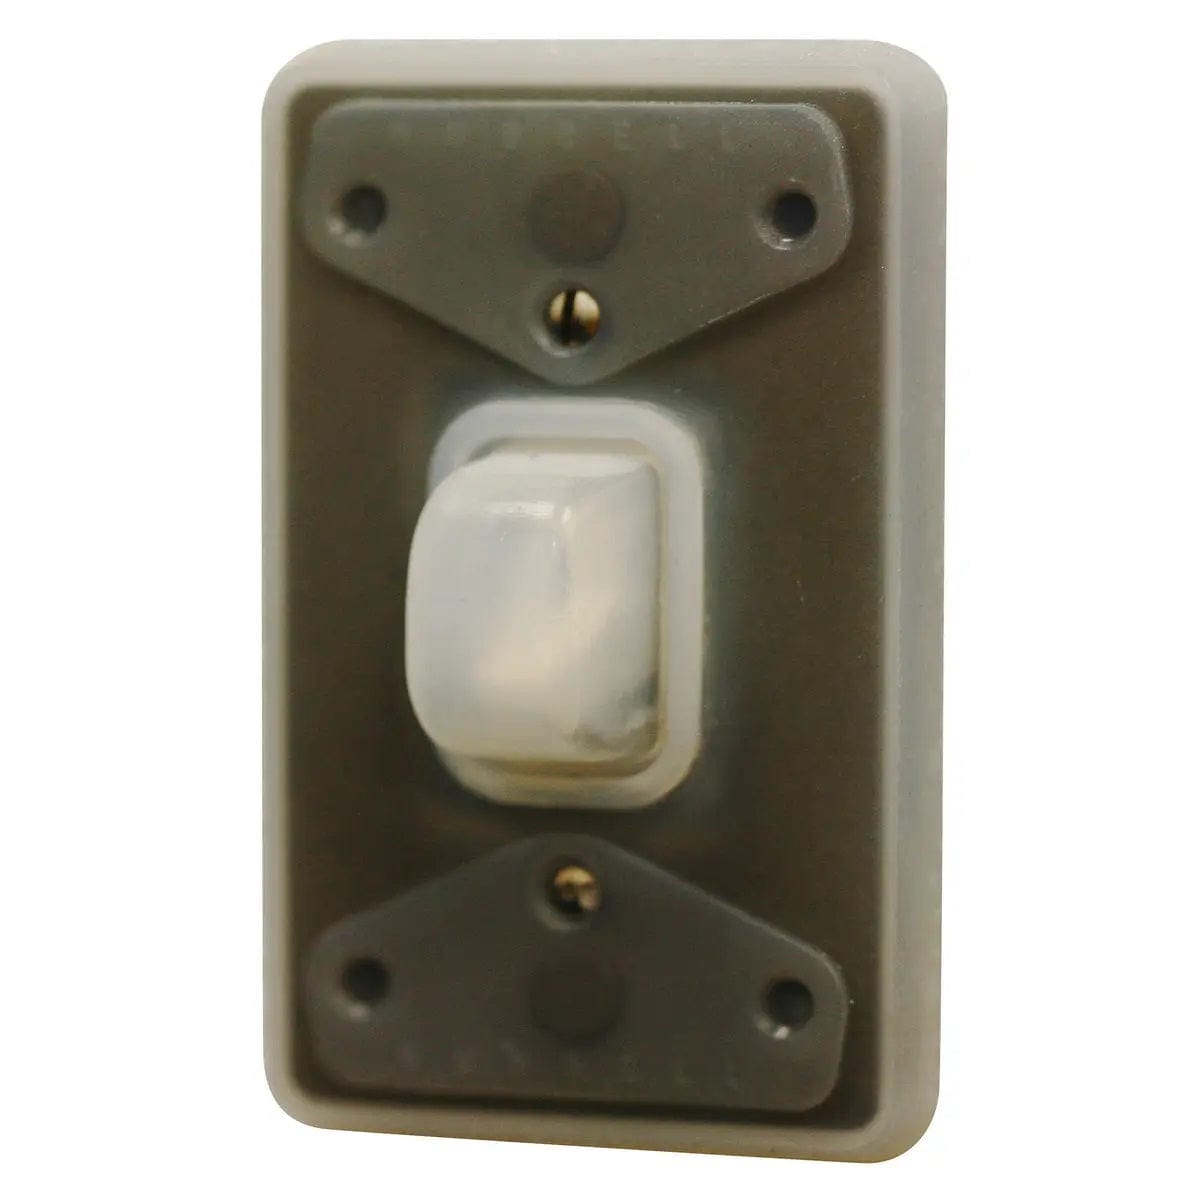 Hubbell Qualifies for Free Shipping Hubbell HBL1795 Weatherproof Waleplate for Toggle Switch #HBL1795